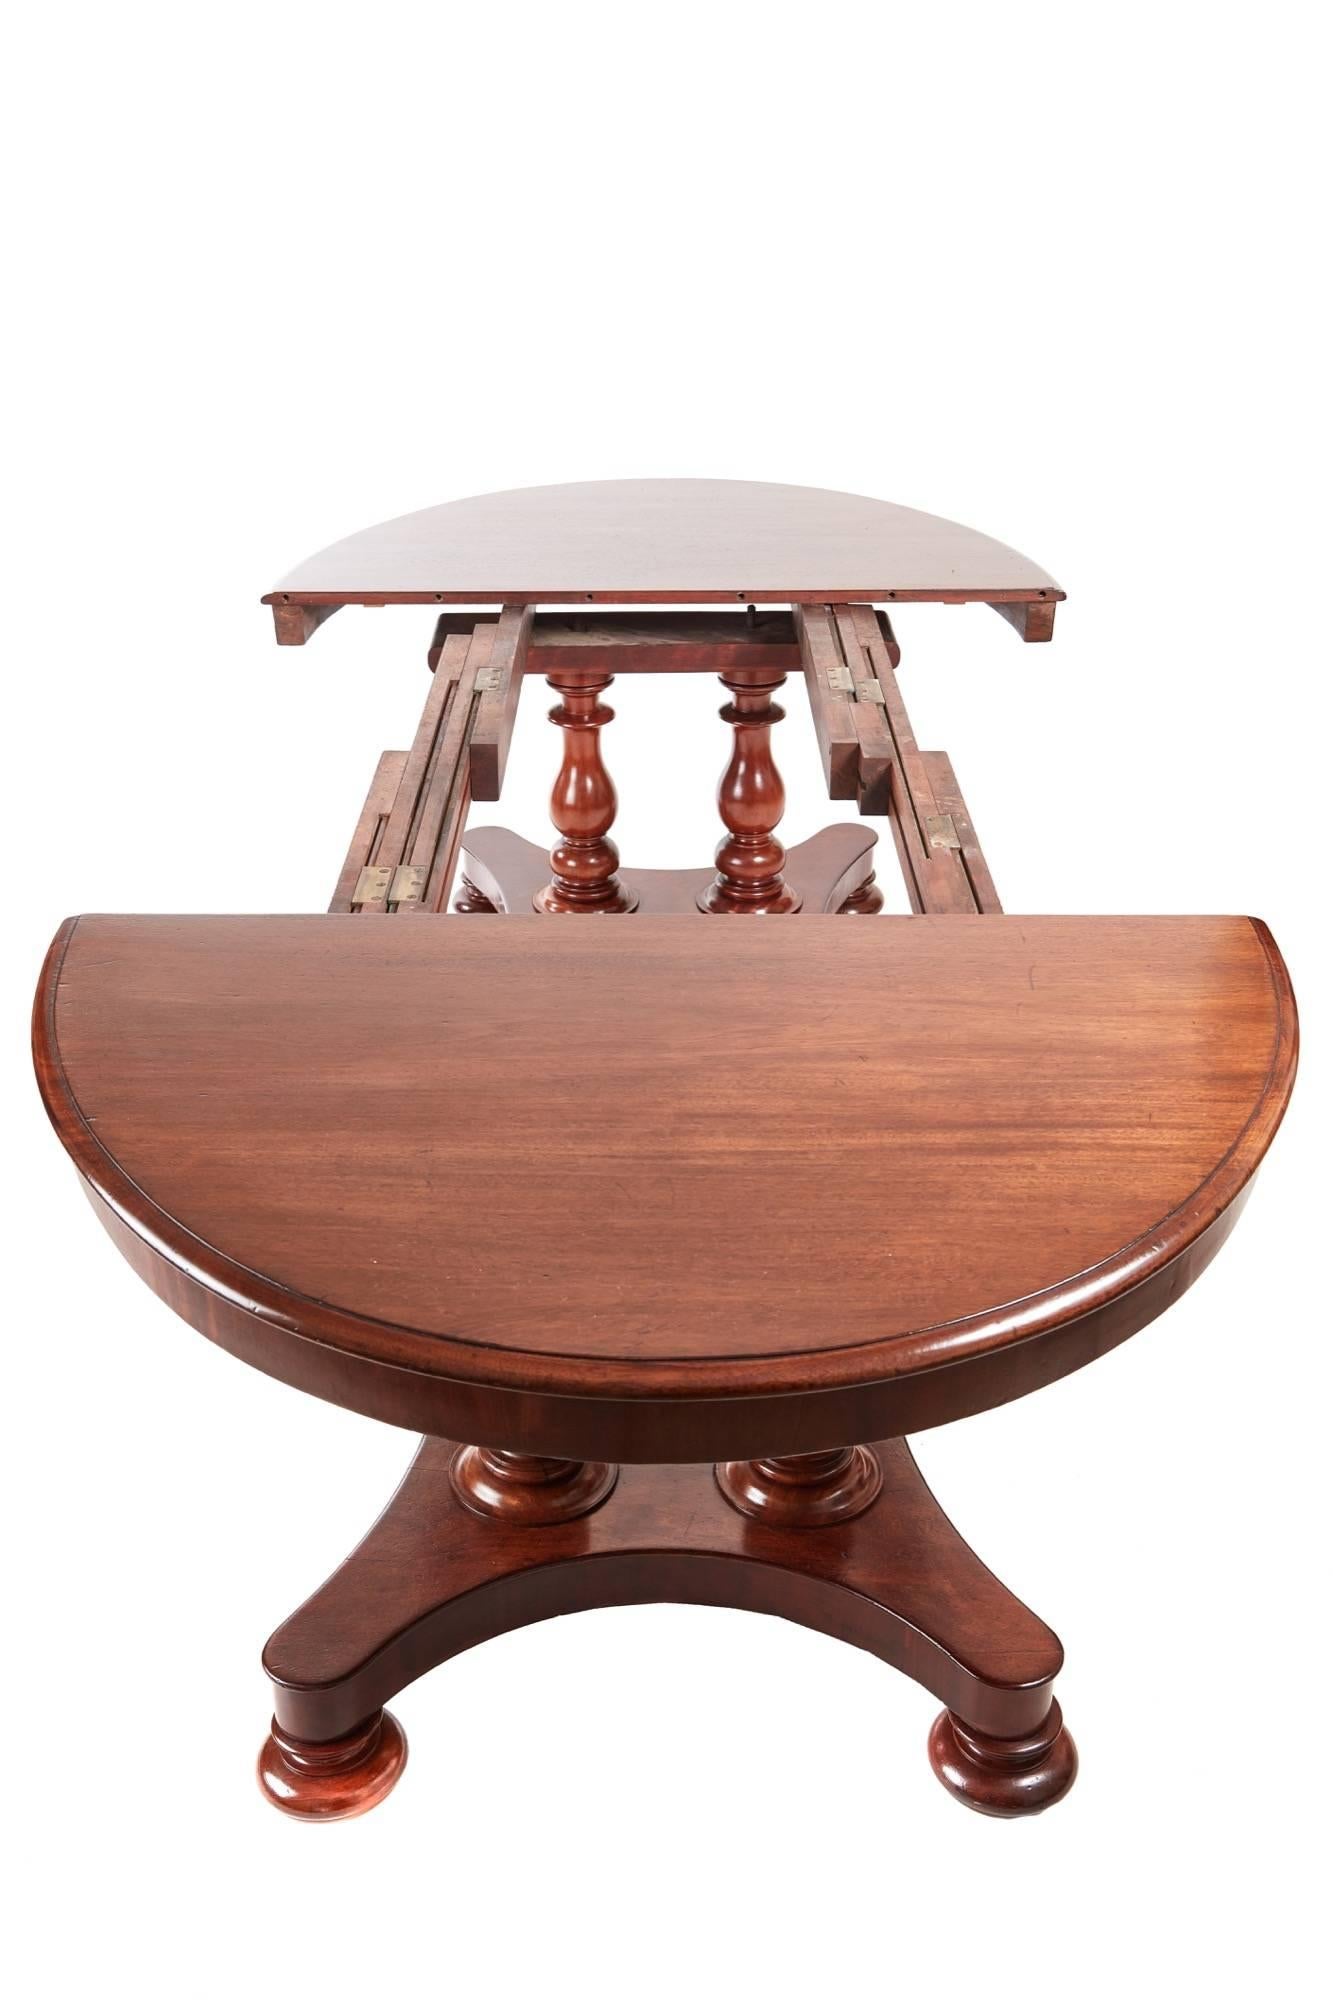 19th century mahogany extending pedestal dining table, with moulded edge top, two additional leaves and plain apron, the base with four turned columns on a platform base that splits open with bun feet below and concealed castors under those,
a rare